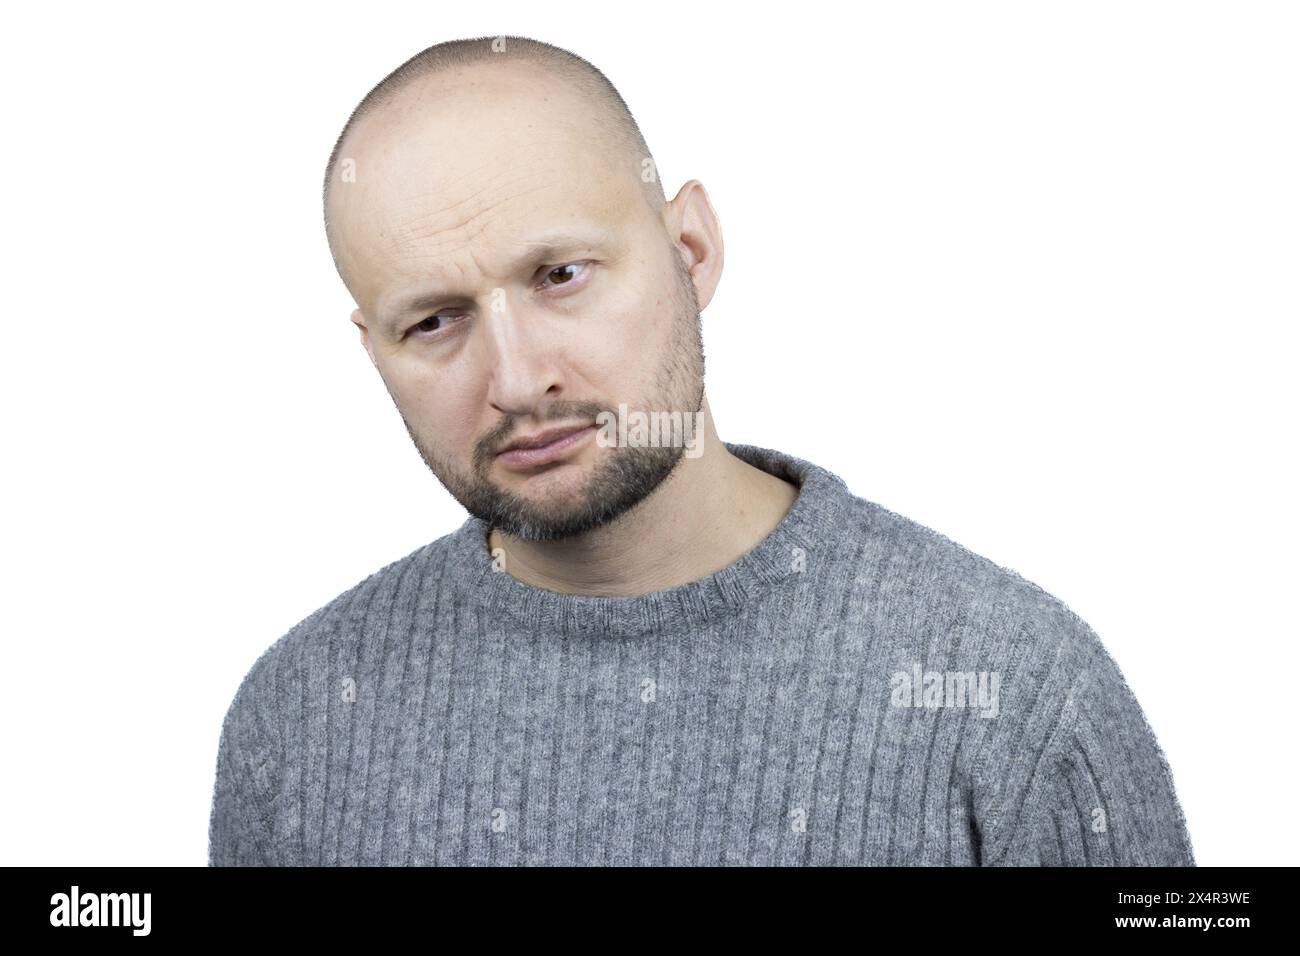 This is a poignant portrait of a man, set against a stark white background, embodying the struggle of living with depression. Stock Photo